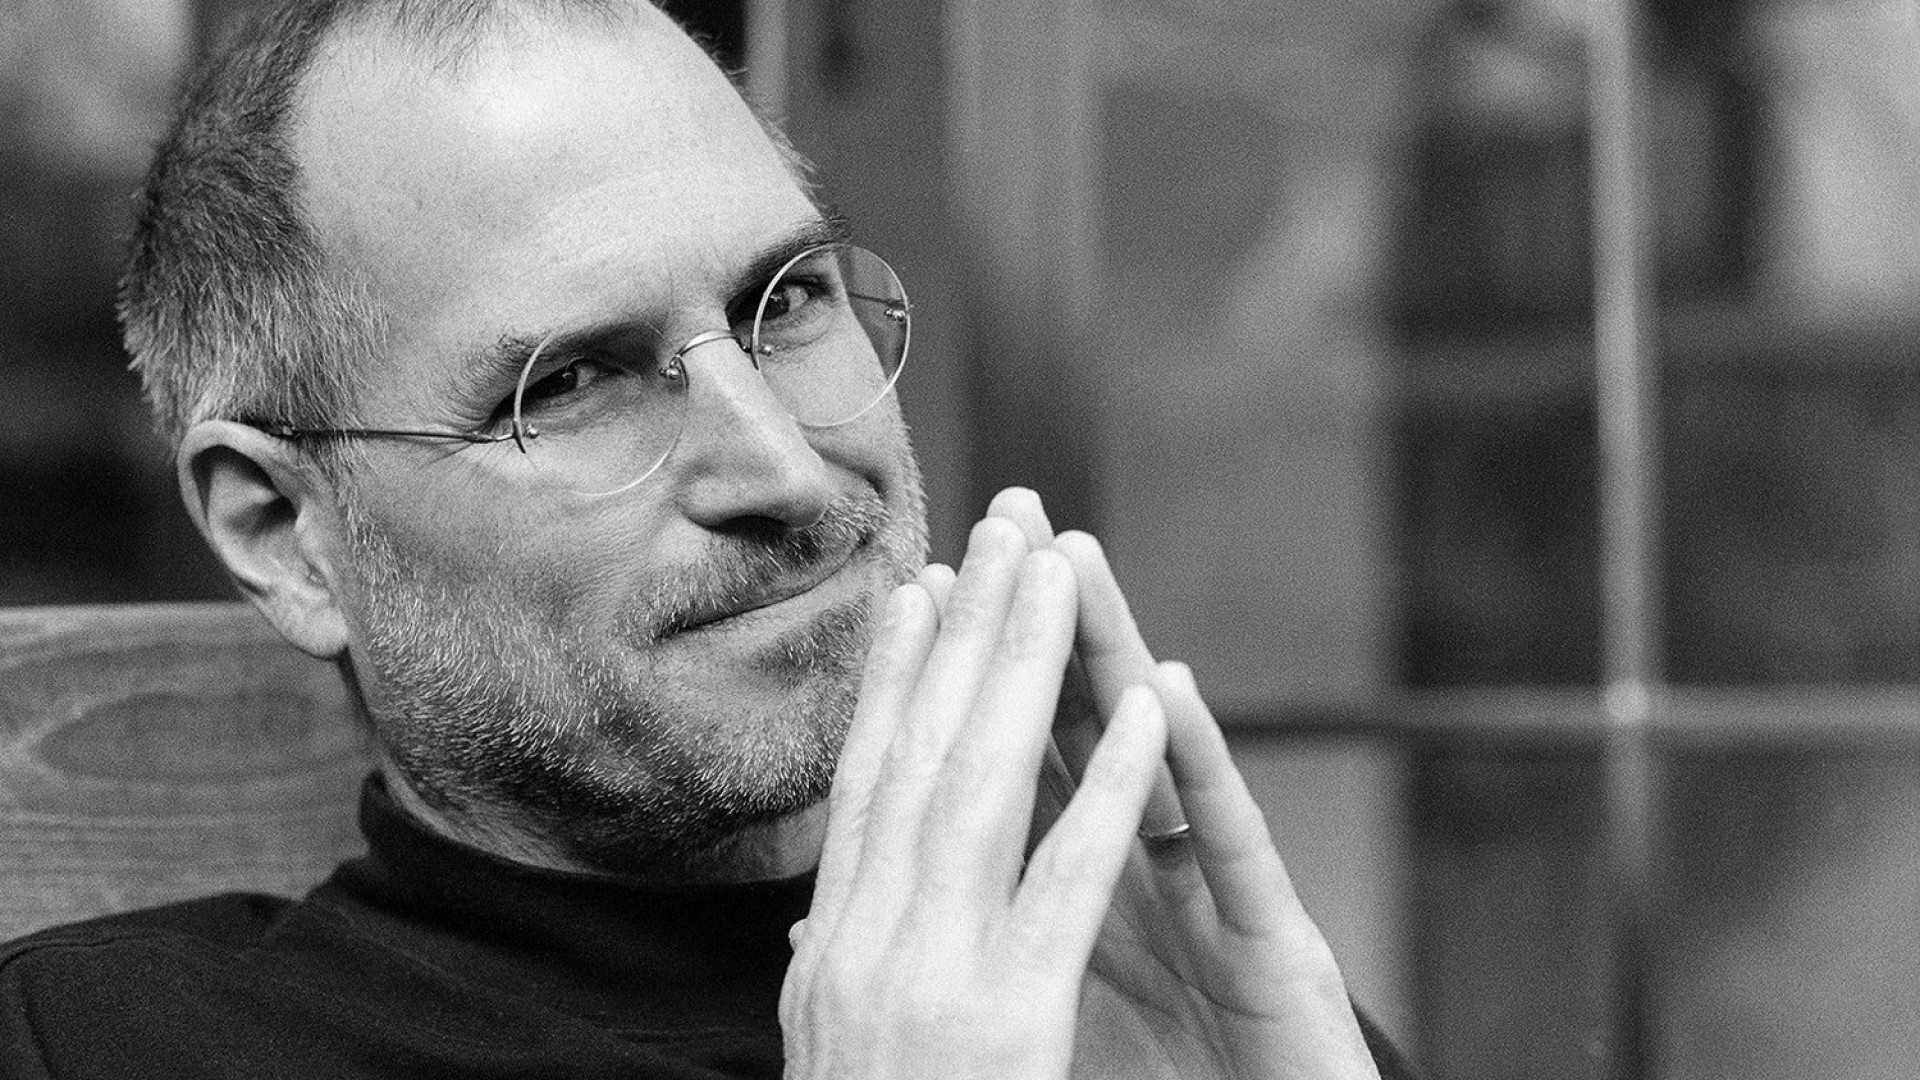 Tim Cook emails employees to reflect on third anniversary of Steve Jobs' death